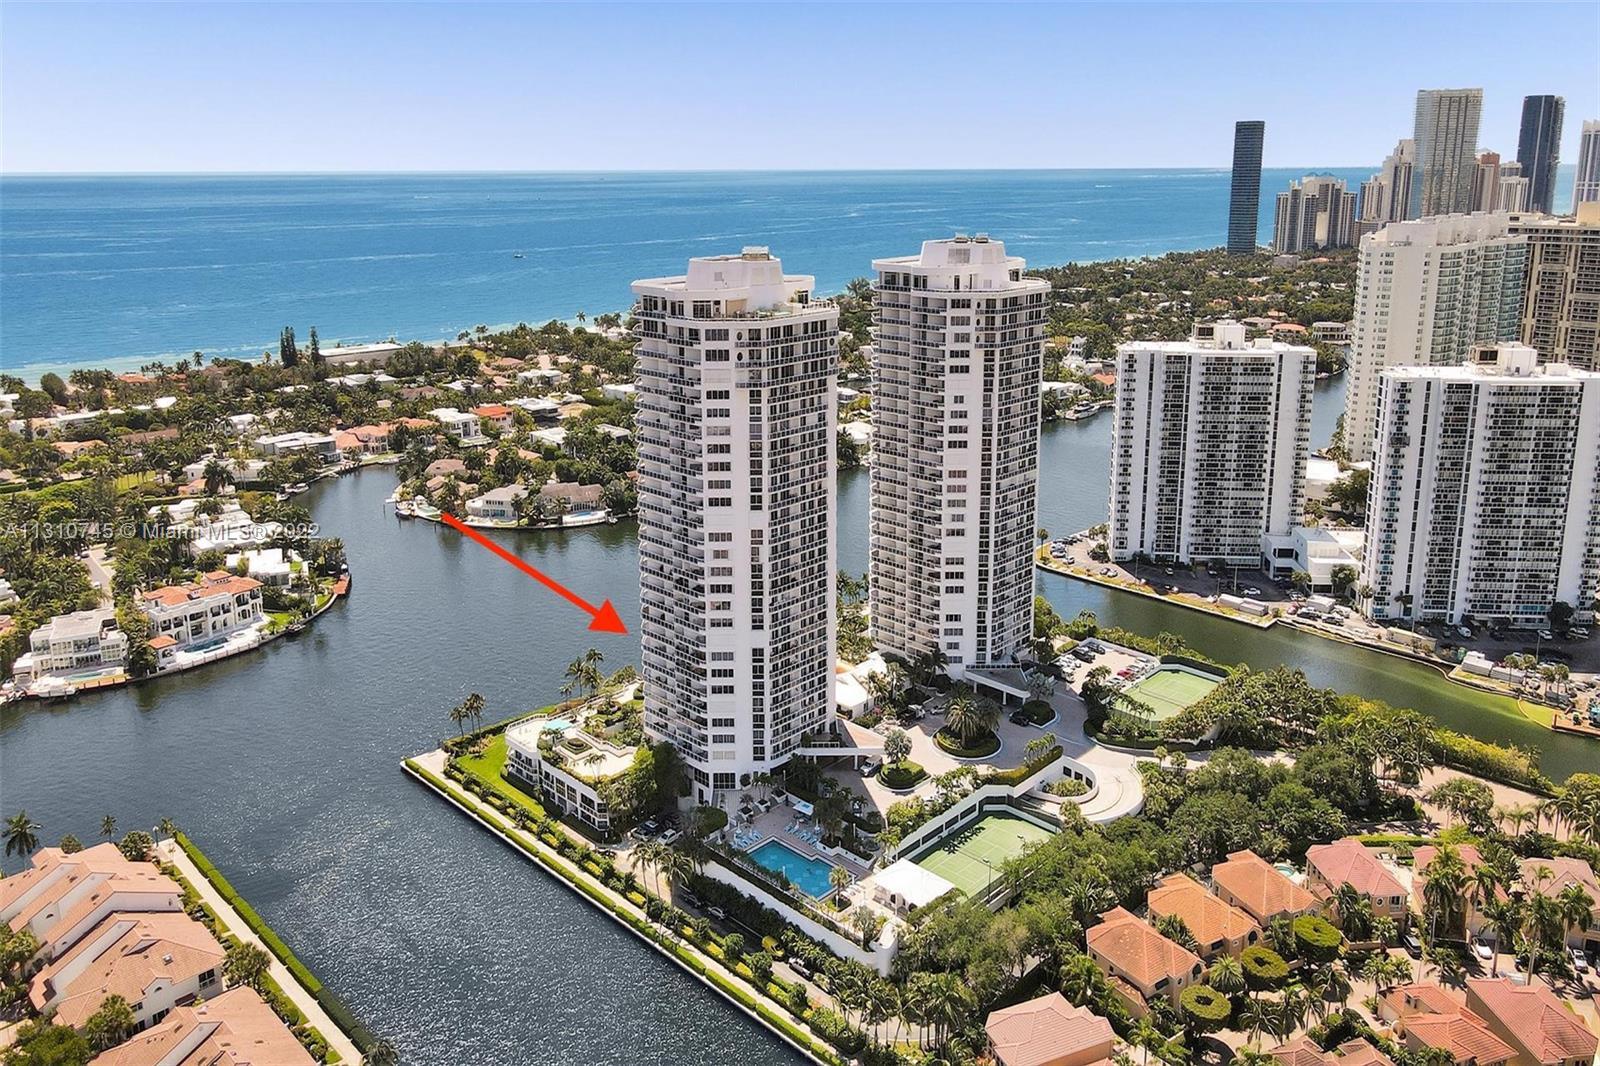 Aventura Jewel! Exclusive One Island Place located in Aventura. Two meticulous Towers with 112 exclu